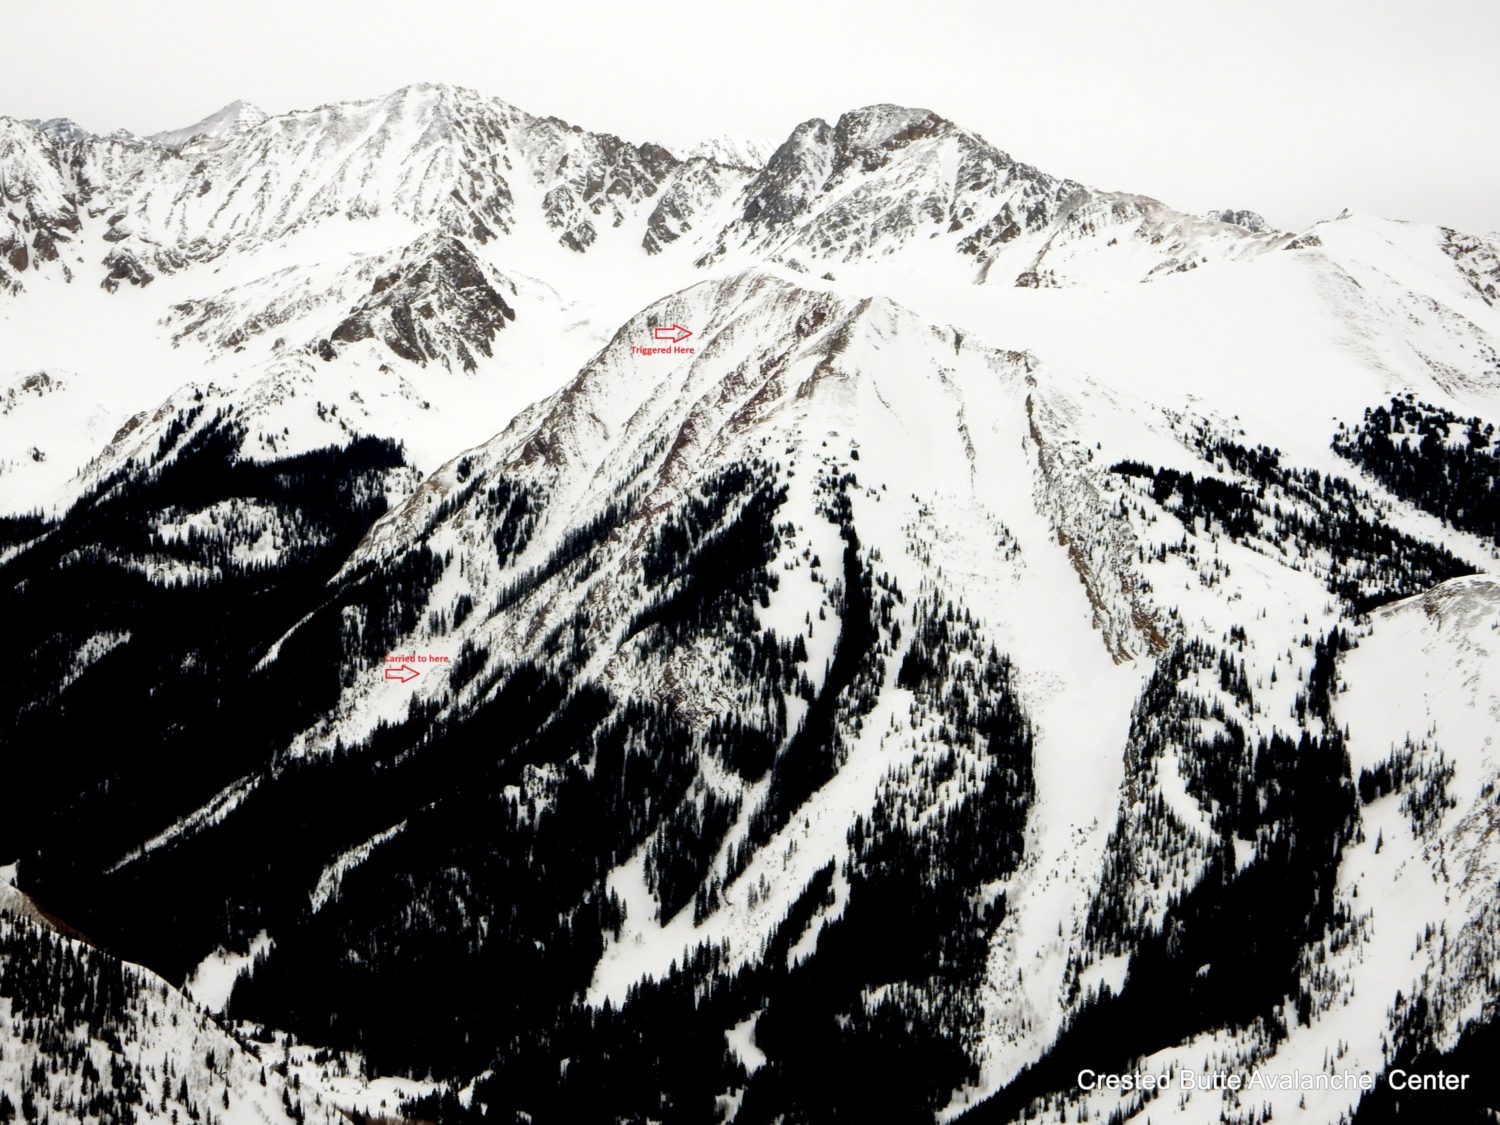 Location of the avalanche, on a sub-ridge of White Mountain above Copper Creek. Image: Crested Butte Avalanche Center